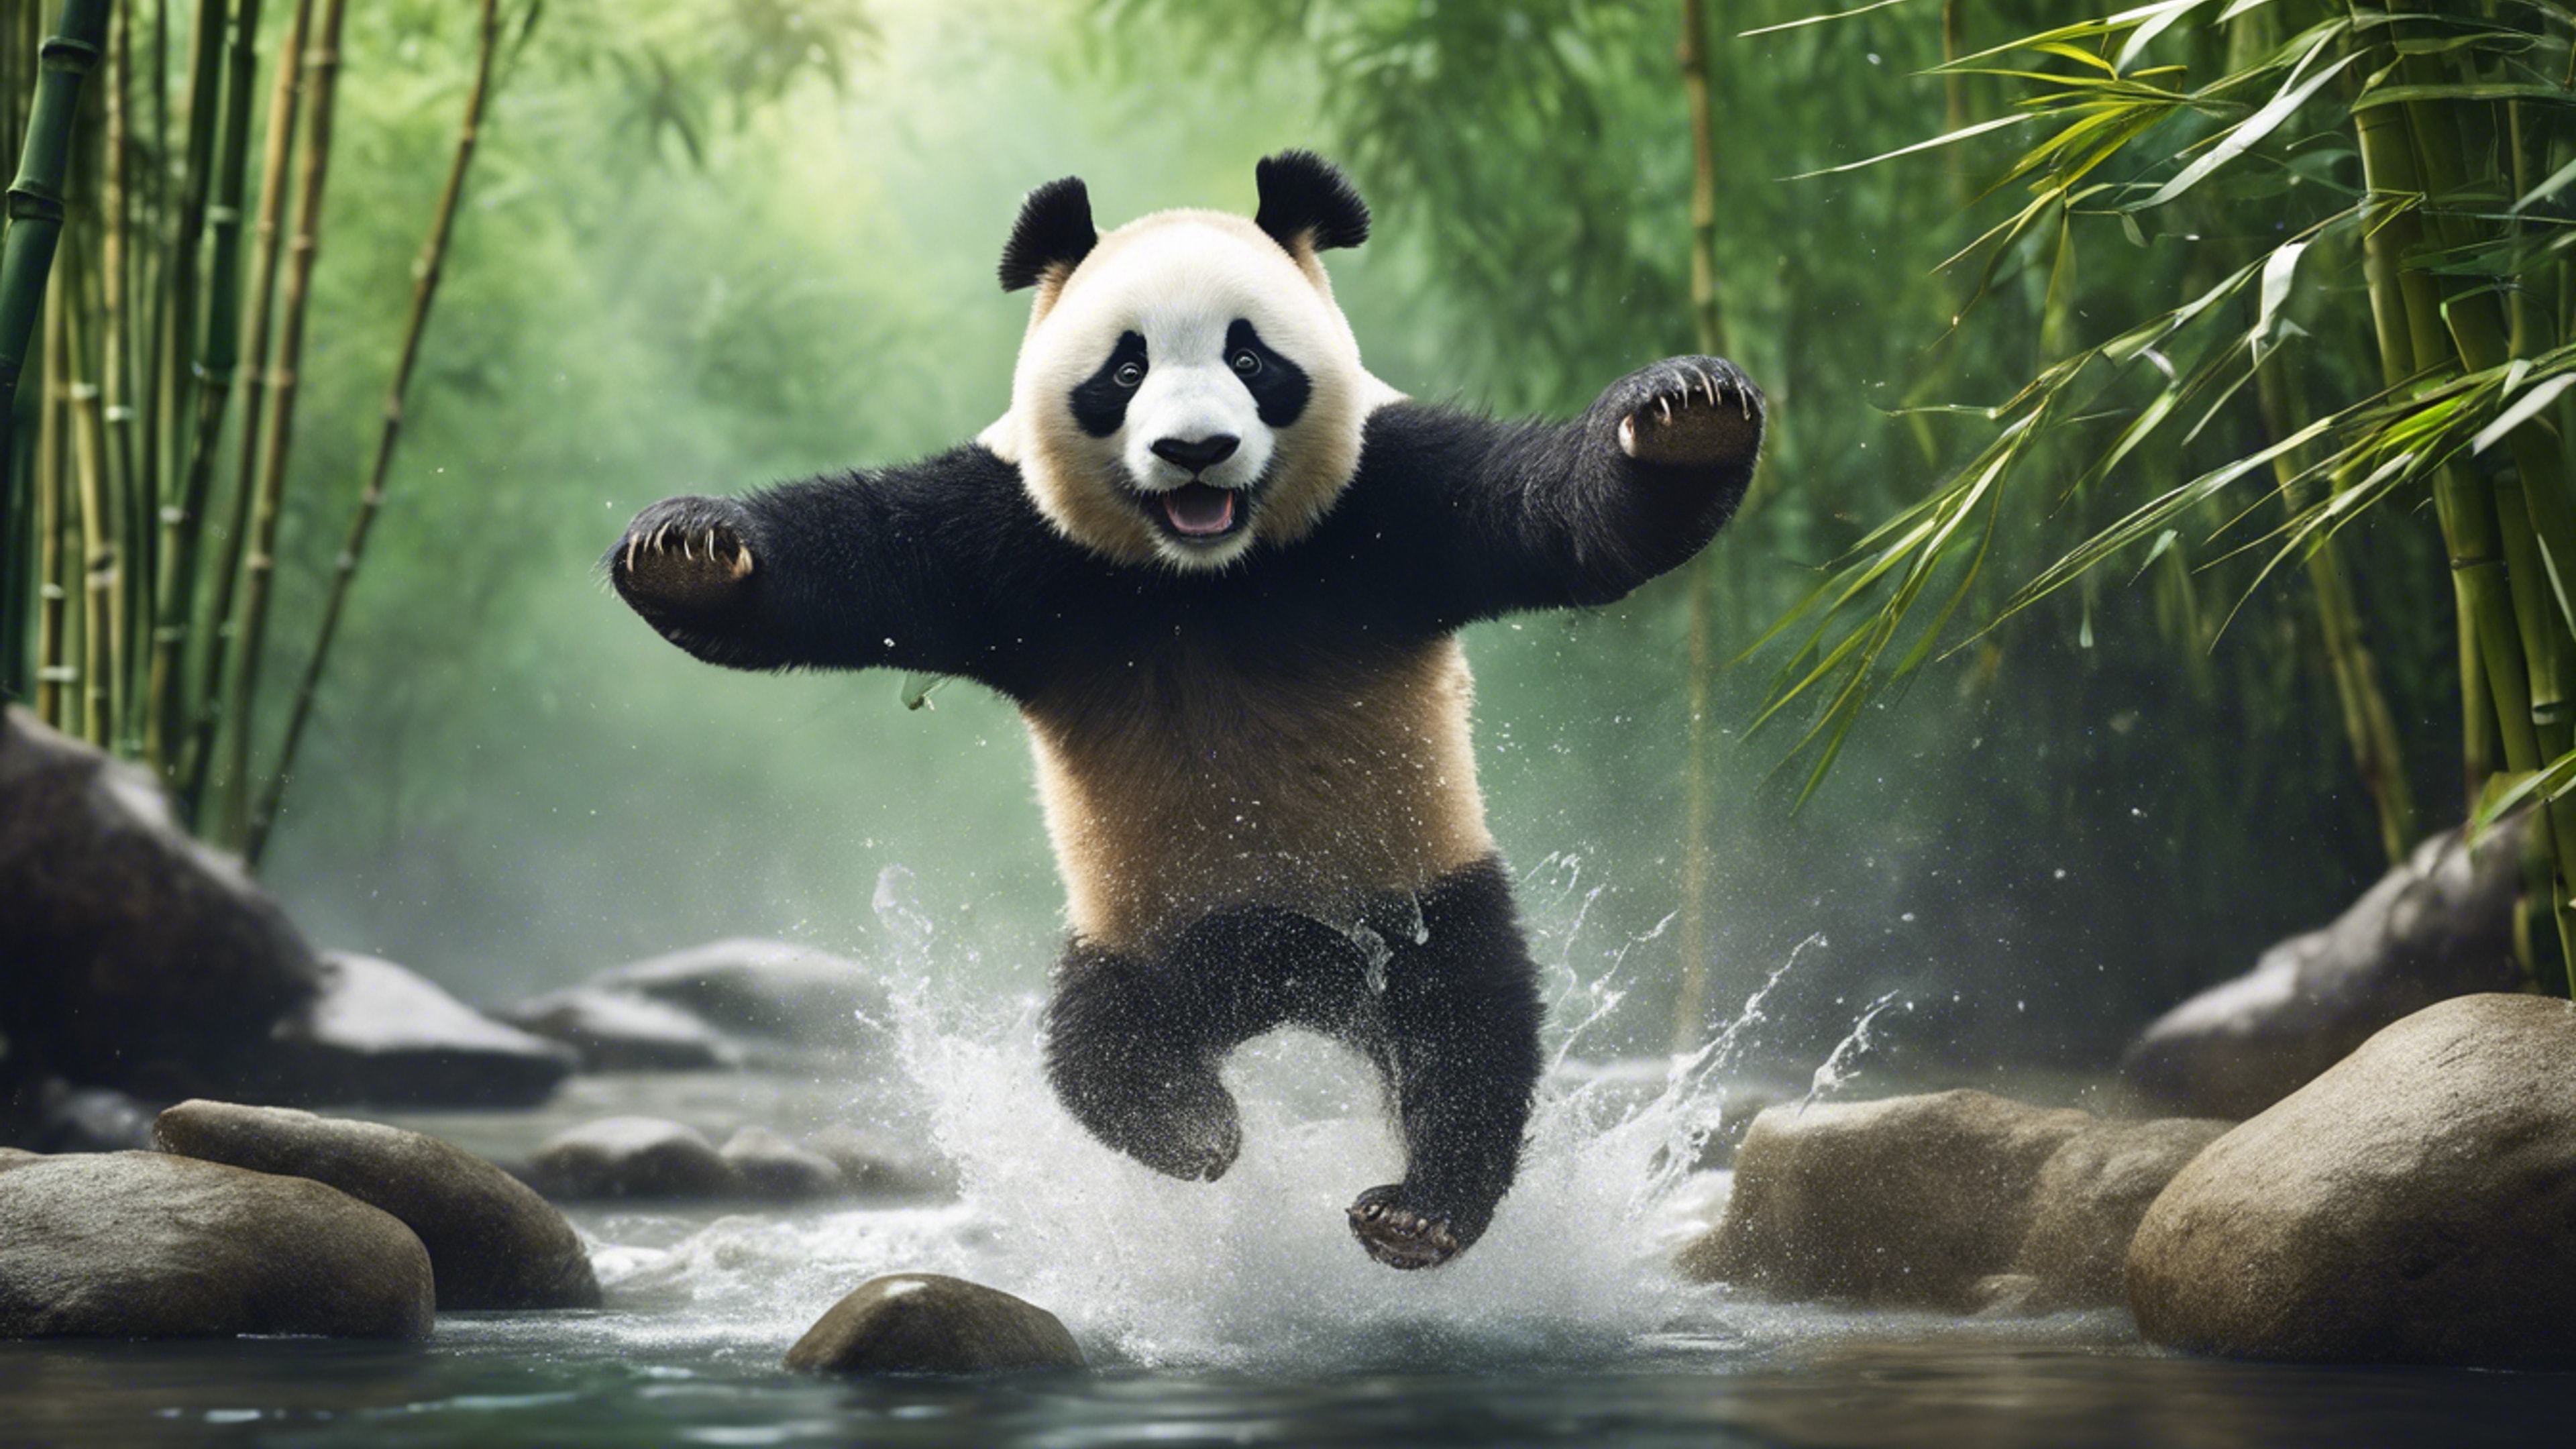 An adventurous panda leaping across a rapid creek with bamboo forests in the backdrop. Tapeta[317eaaa1af264f04a7c3]